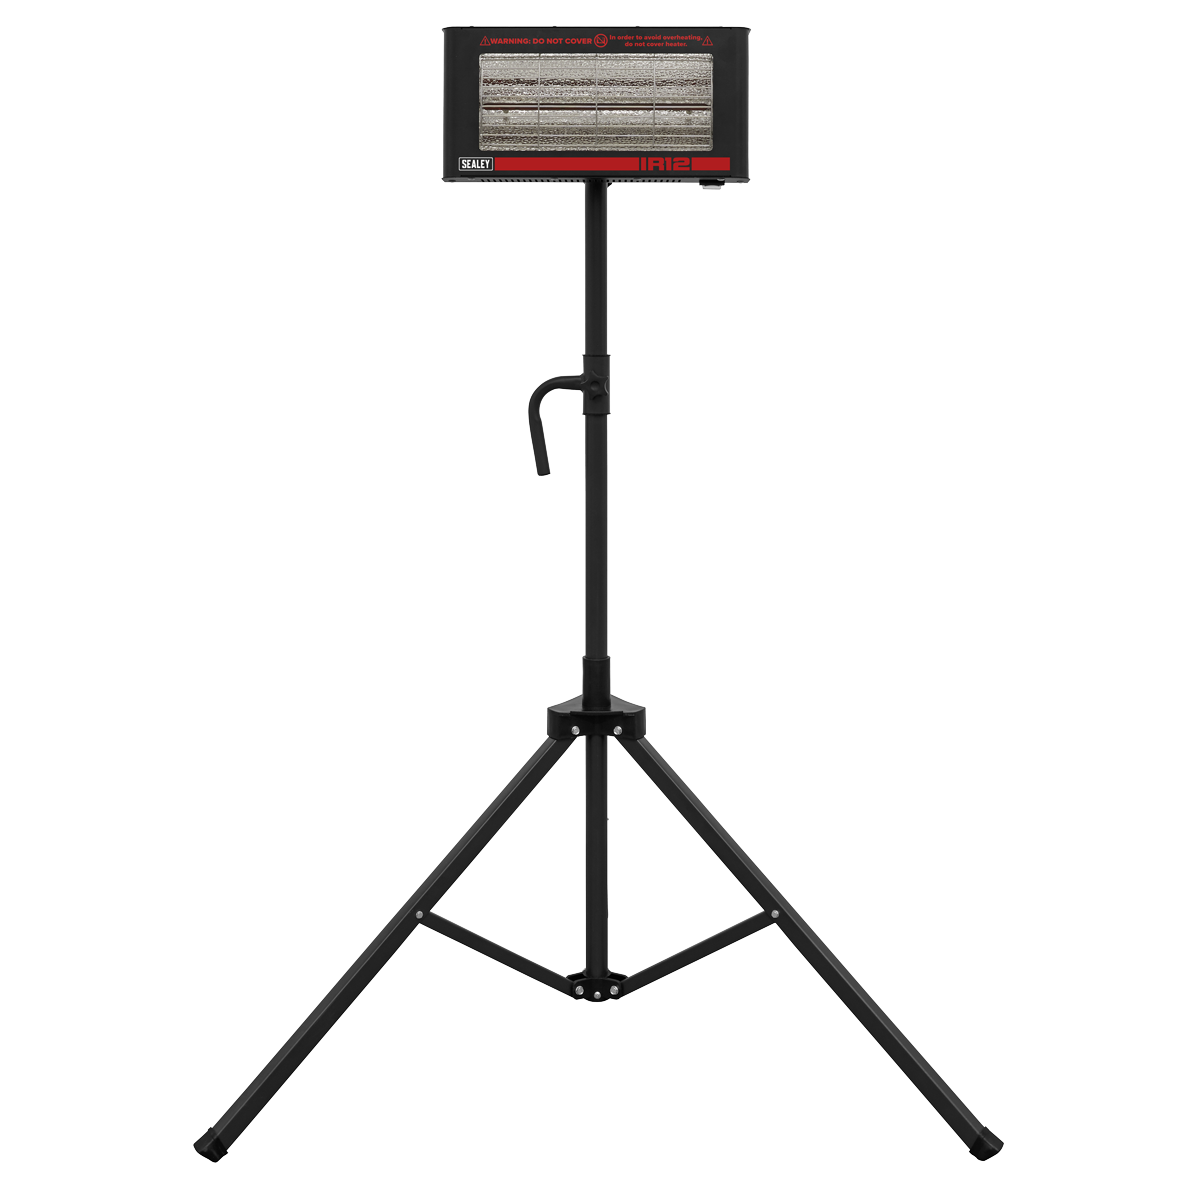 PORTABLE - tripod stand means heater can be positioned anywhere within range of mains power.